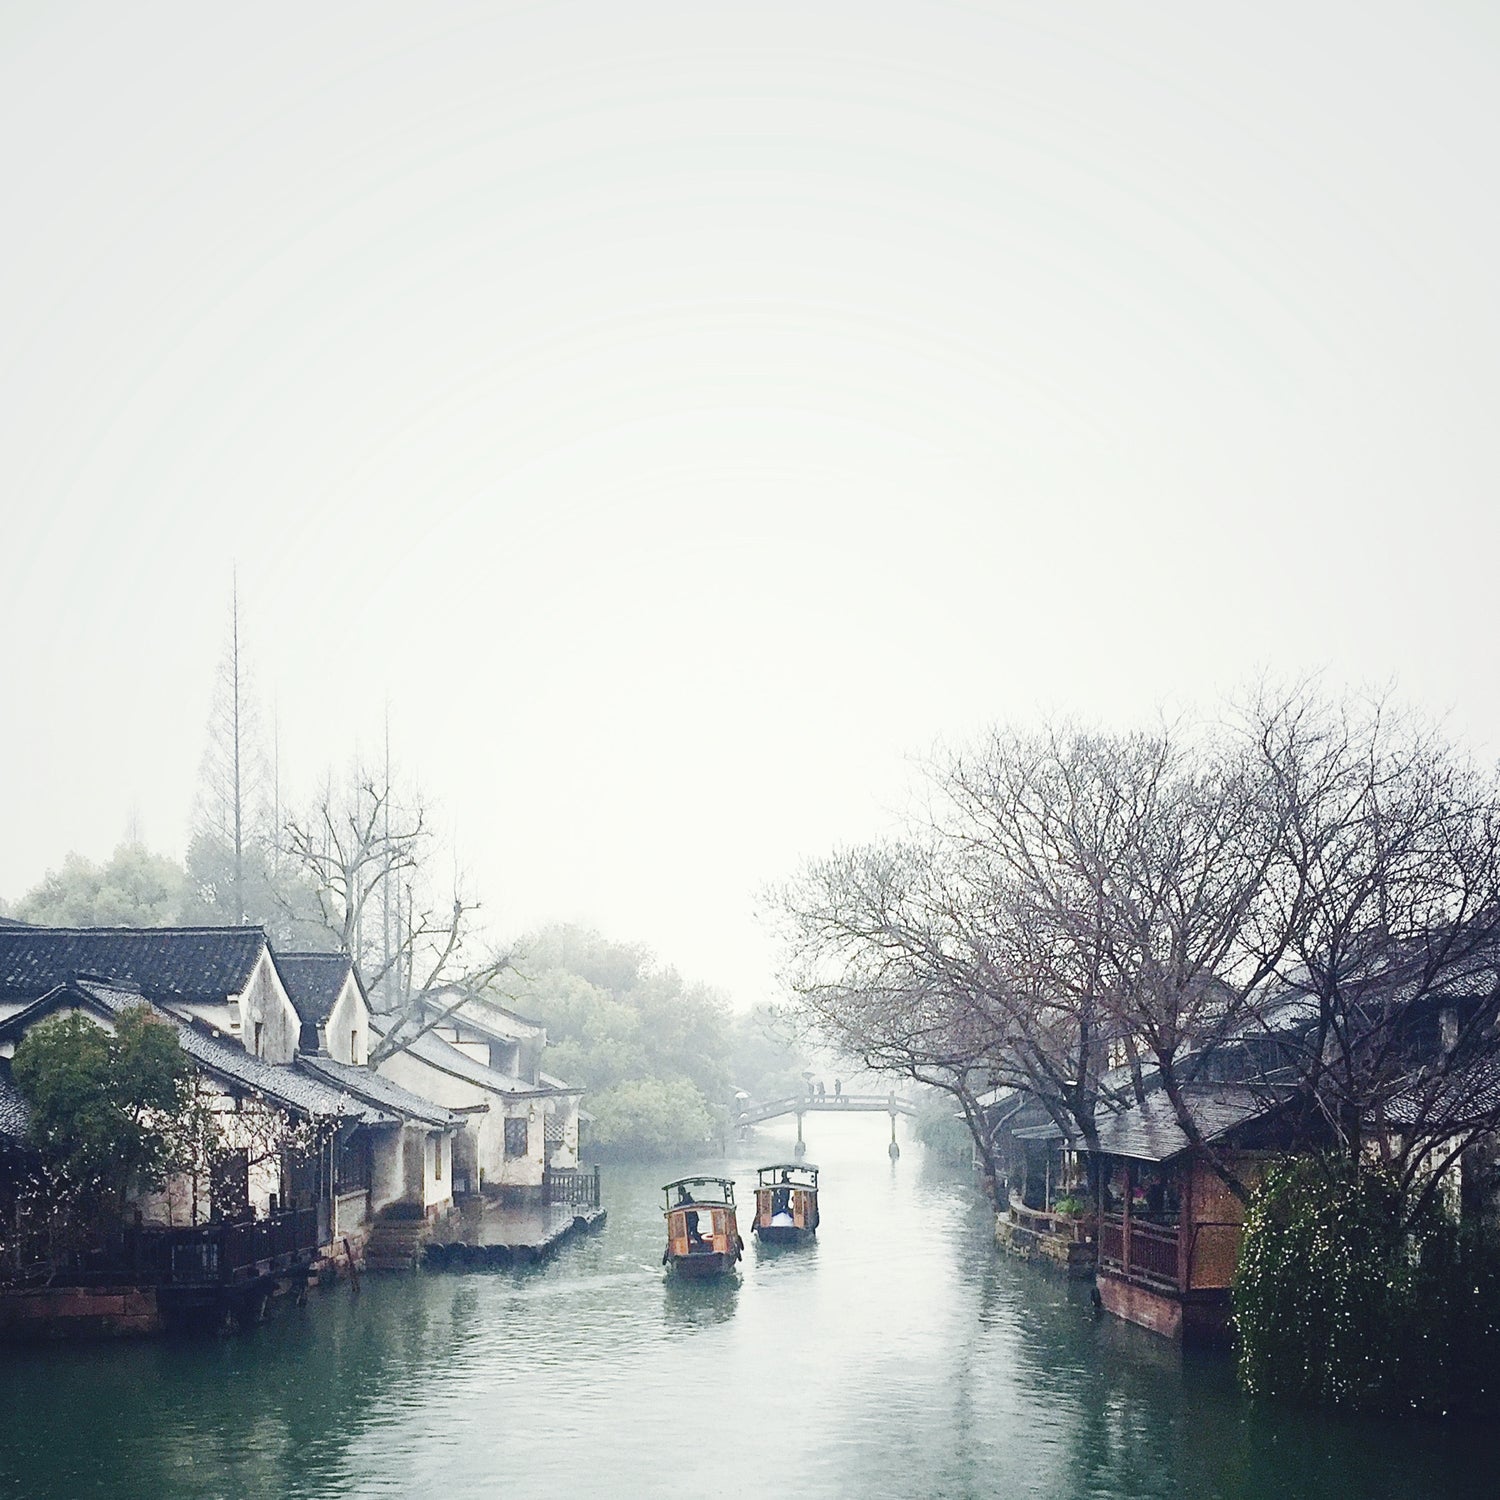  two boats on the river, chinese traditional houses on both sides of the canal.